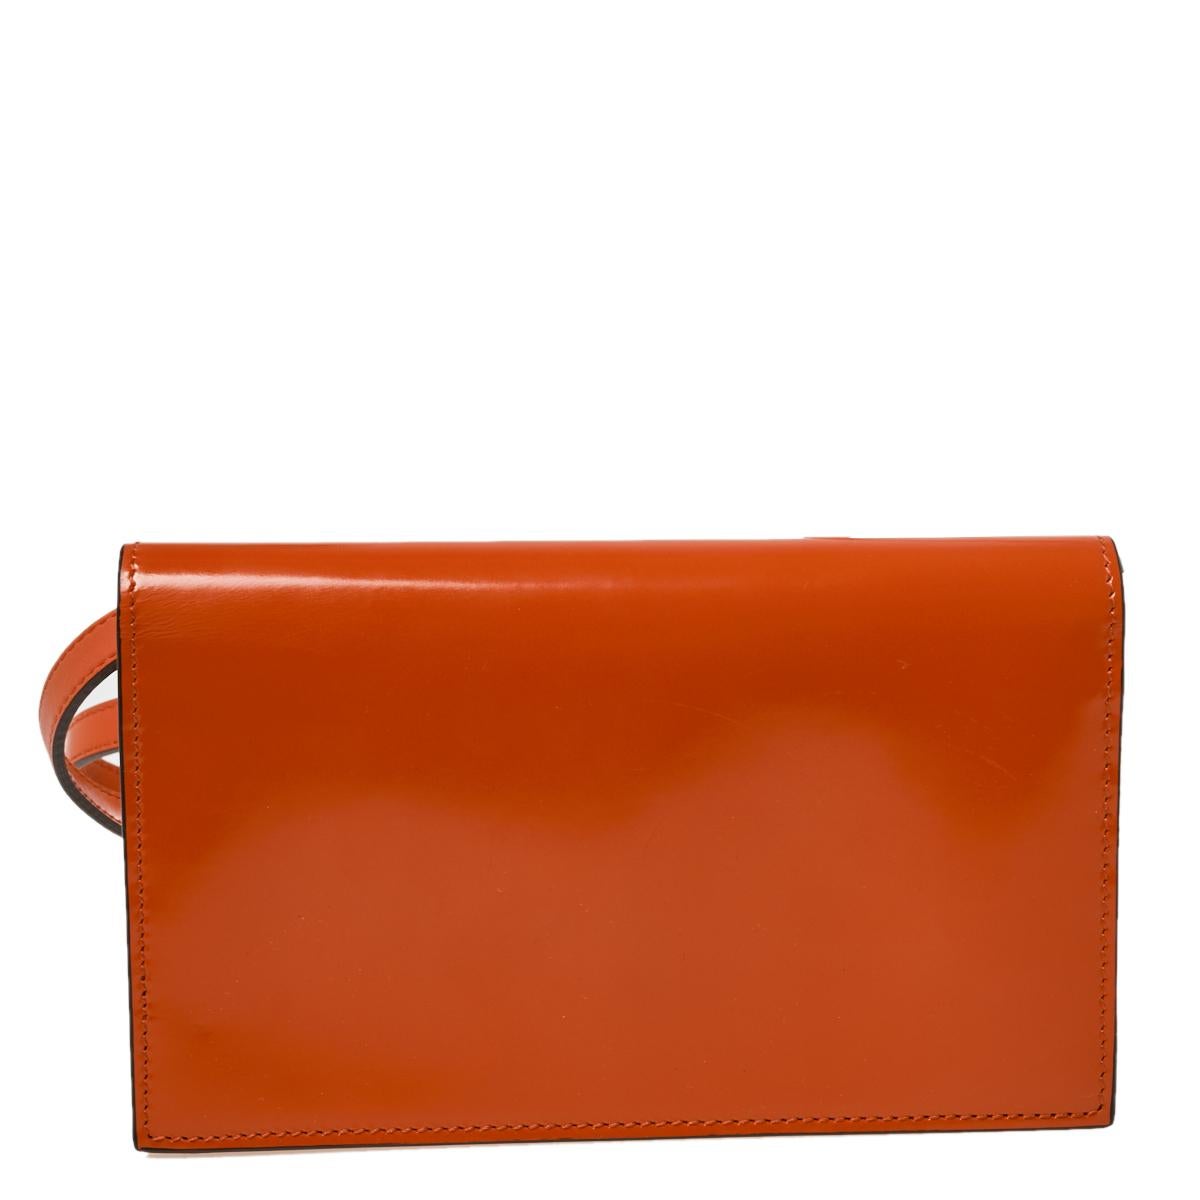 Coming from Gucci, this clutch bag will showcase your fashion-forward choice. Presenting a lovely shade of orange and the GG logo on the front flap, this bag proves to be an impeccable and contemporary addition to your closet.

Includes: Original